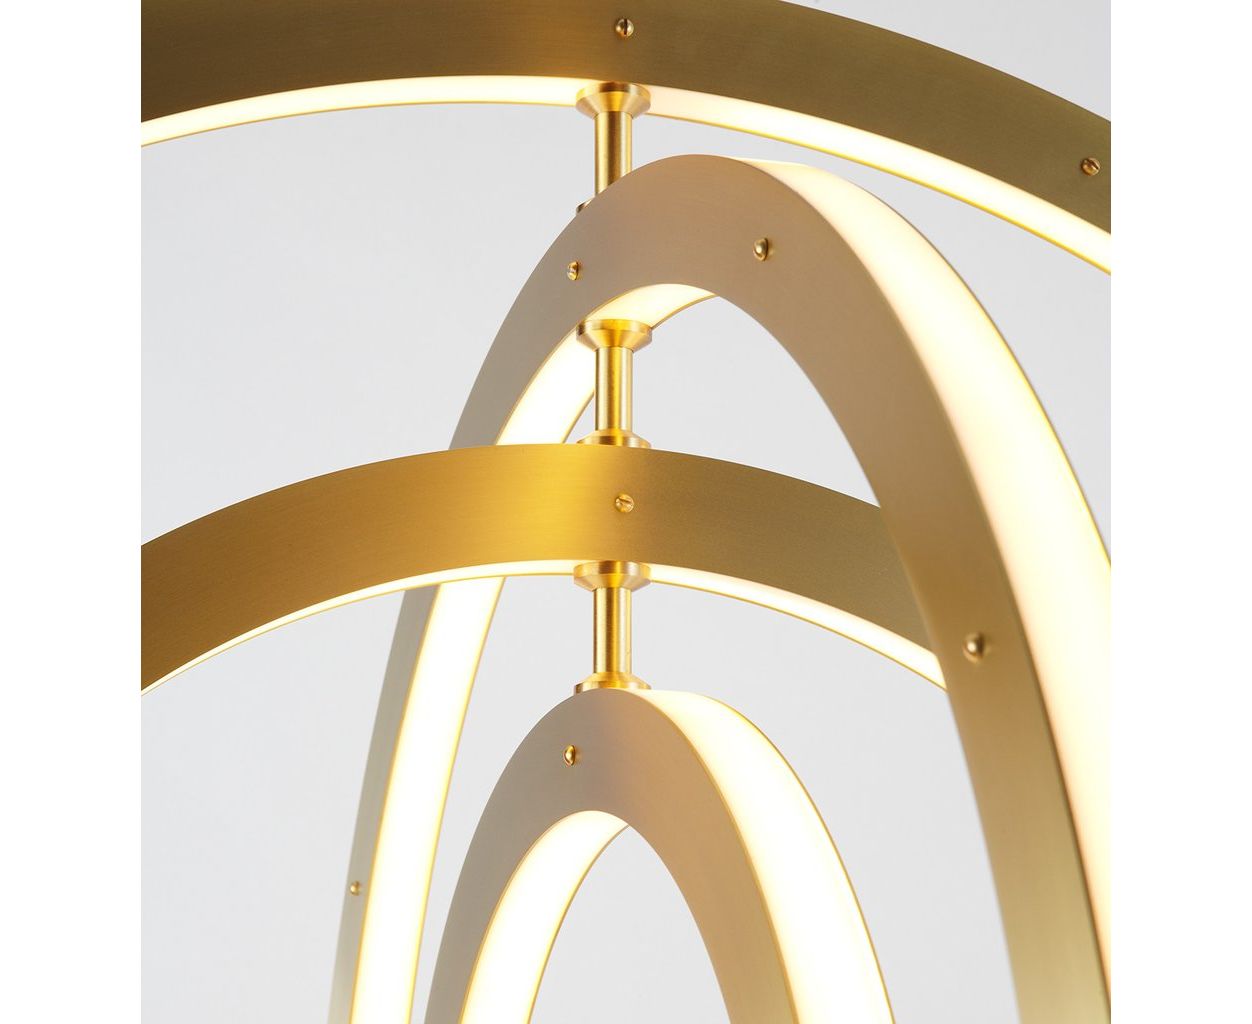 Roll hill. Люстра Roll&Hill Halo Chandelier 4 Rings. Люстра Aura rm6007/5p. Люстра Aura rm1888/4 oy. Люстра Aura ahp8200/10acd.